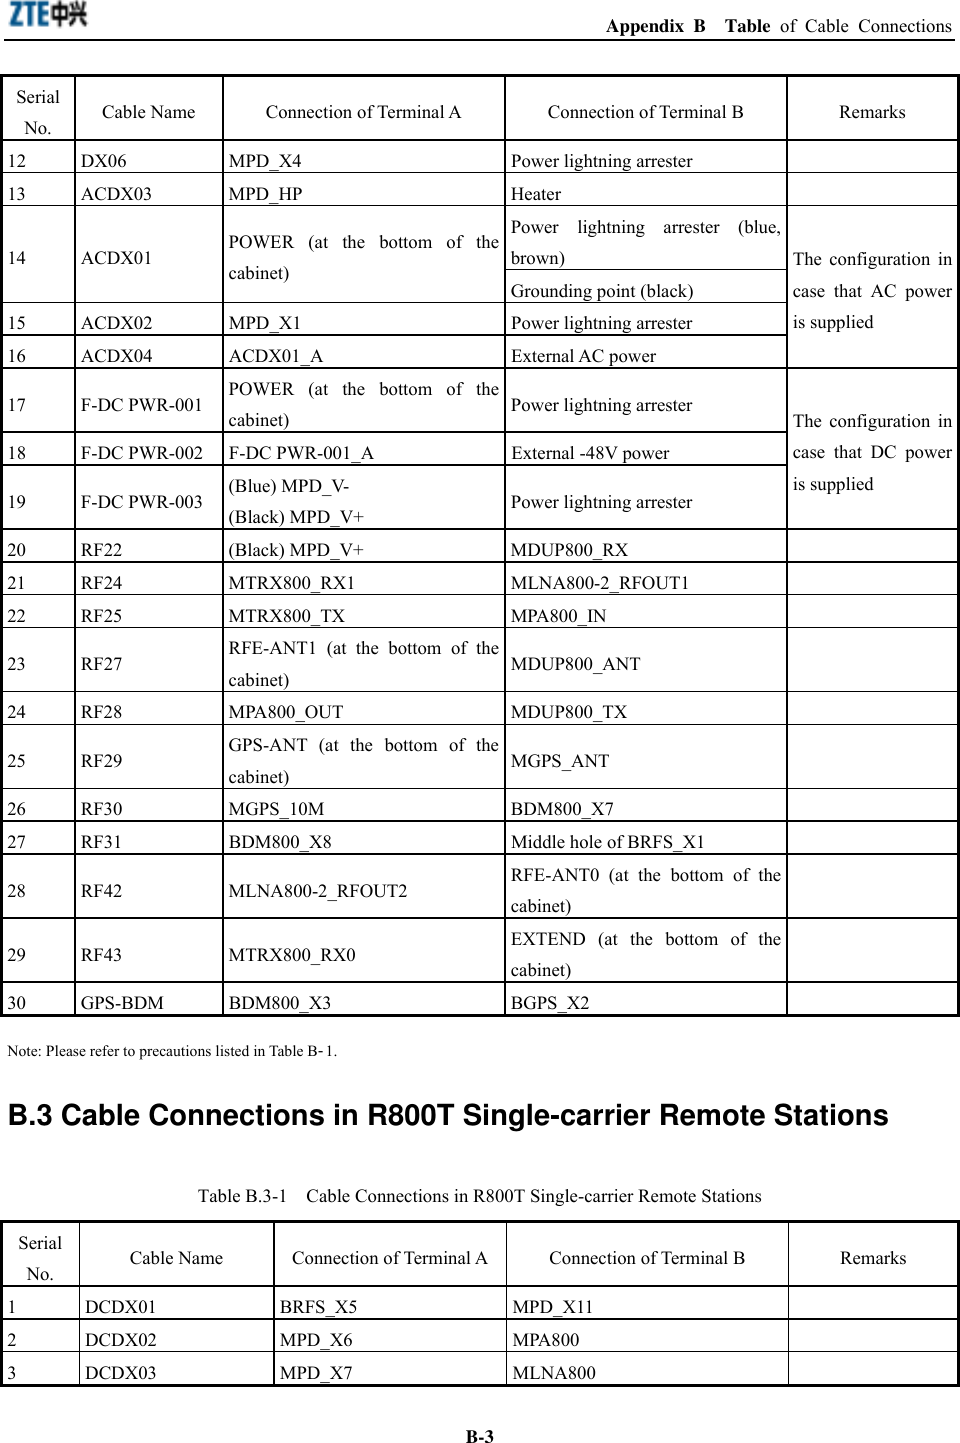  Appendix B  Table of Cable Connections  B-3Serial No.  Cable Name  Connection of Terminal A  Connection of Terminal B  Remarks 12  DX06  MPD_X4  Power lightning arrester   13 ACDX03  MPD_HP  Heater   Power lightning arrester (blue, brown) 14 ACDX01  POWER (at the bottom of the cabinet) Grounding point (black) 15  ACDX02  MPD_X1  Power lightning arrester 16 ACDX04  ACDX01_A  External AC power The configuration in case that AC power is supplied 17 F-DC PWR-001 POWER (at the bottom of the cabinet)  Power lightning arrester 18  F-DC PWR-002  F-DC PWR-001_A  External -48V power 19 F-DC PWR-003 (Blue) MPD_V- (Black) MPD_V+  Power lightning arrester The configuration in case that DC power is supplied 20 RF22  (Black) MPD_V+  MDUP800_RX   21 RF24  MTRX800_RX1  MLNA800-2_RFOUT1   22 RF25  MTRX800_TX  MPA800_IN   23 RF27  RFE-ANT1 (at the bottom of the cabinet)  MDUP800_ANT  24 RF28  MPA800_OUT  MDUP800_TX   25 RF29  GPS-ANT (at the bottom of the cabinet)  MGPS_ANT  26 RF30  MGPS_10M  BDM800_X7   27  RF31  BDM800_X8  Middle hole of BRFS_X1   28 RF42  MLNA800-2_RFOUT2  RFE-ANT0 (at the bottom of the cabinet)   29 RF43  MTRX800_RX0  EXTEND (at the bottom of the cabinet)   30 GPS-BDM  BDM800_X3  BGPS_X2   Note: Please refer to precautions listed in Table B-1.  B.3 Cable Connections in R800T Single-carrier Remote Stations Table B.3-1    Cable Connections in R800T Single-carrier Remote Stations Serial No.  Cable Name  Connection of Terminal A Connection of Terminal B  Remarks 1 DCDX01  BRFS_X5  MPD_X11   2 DCDX02  MPD_X6  MPA800   3 DCDX03  MPD_X7  MLNA800   